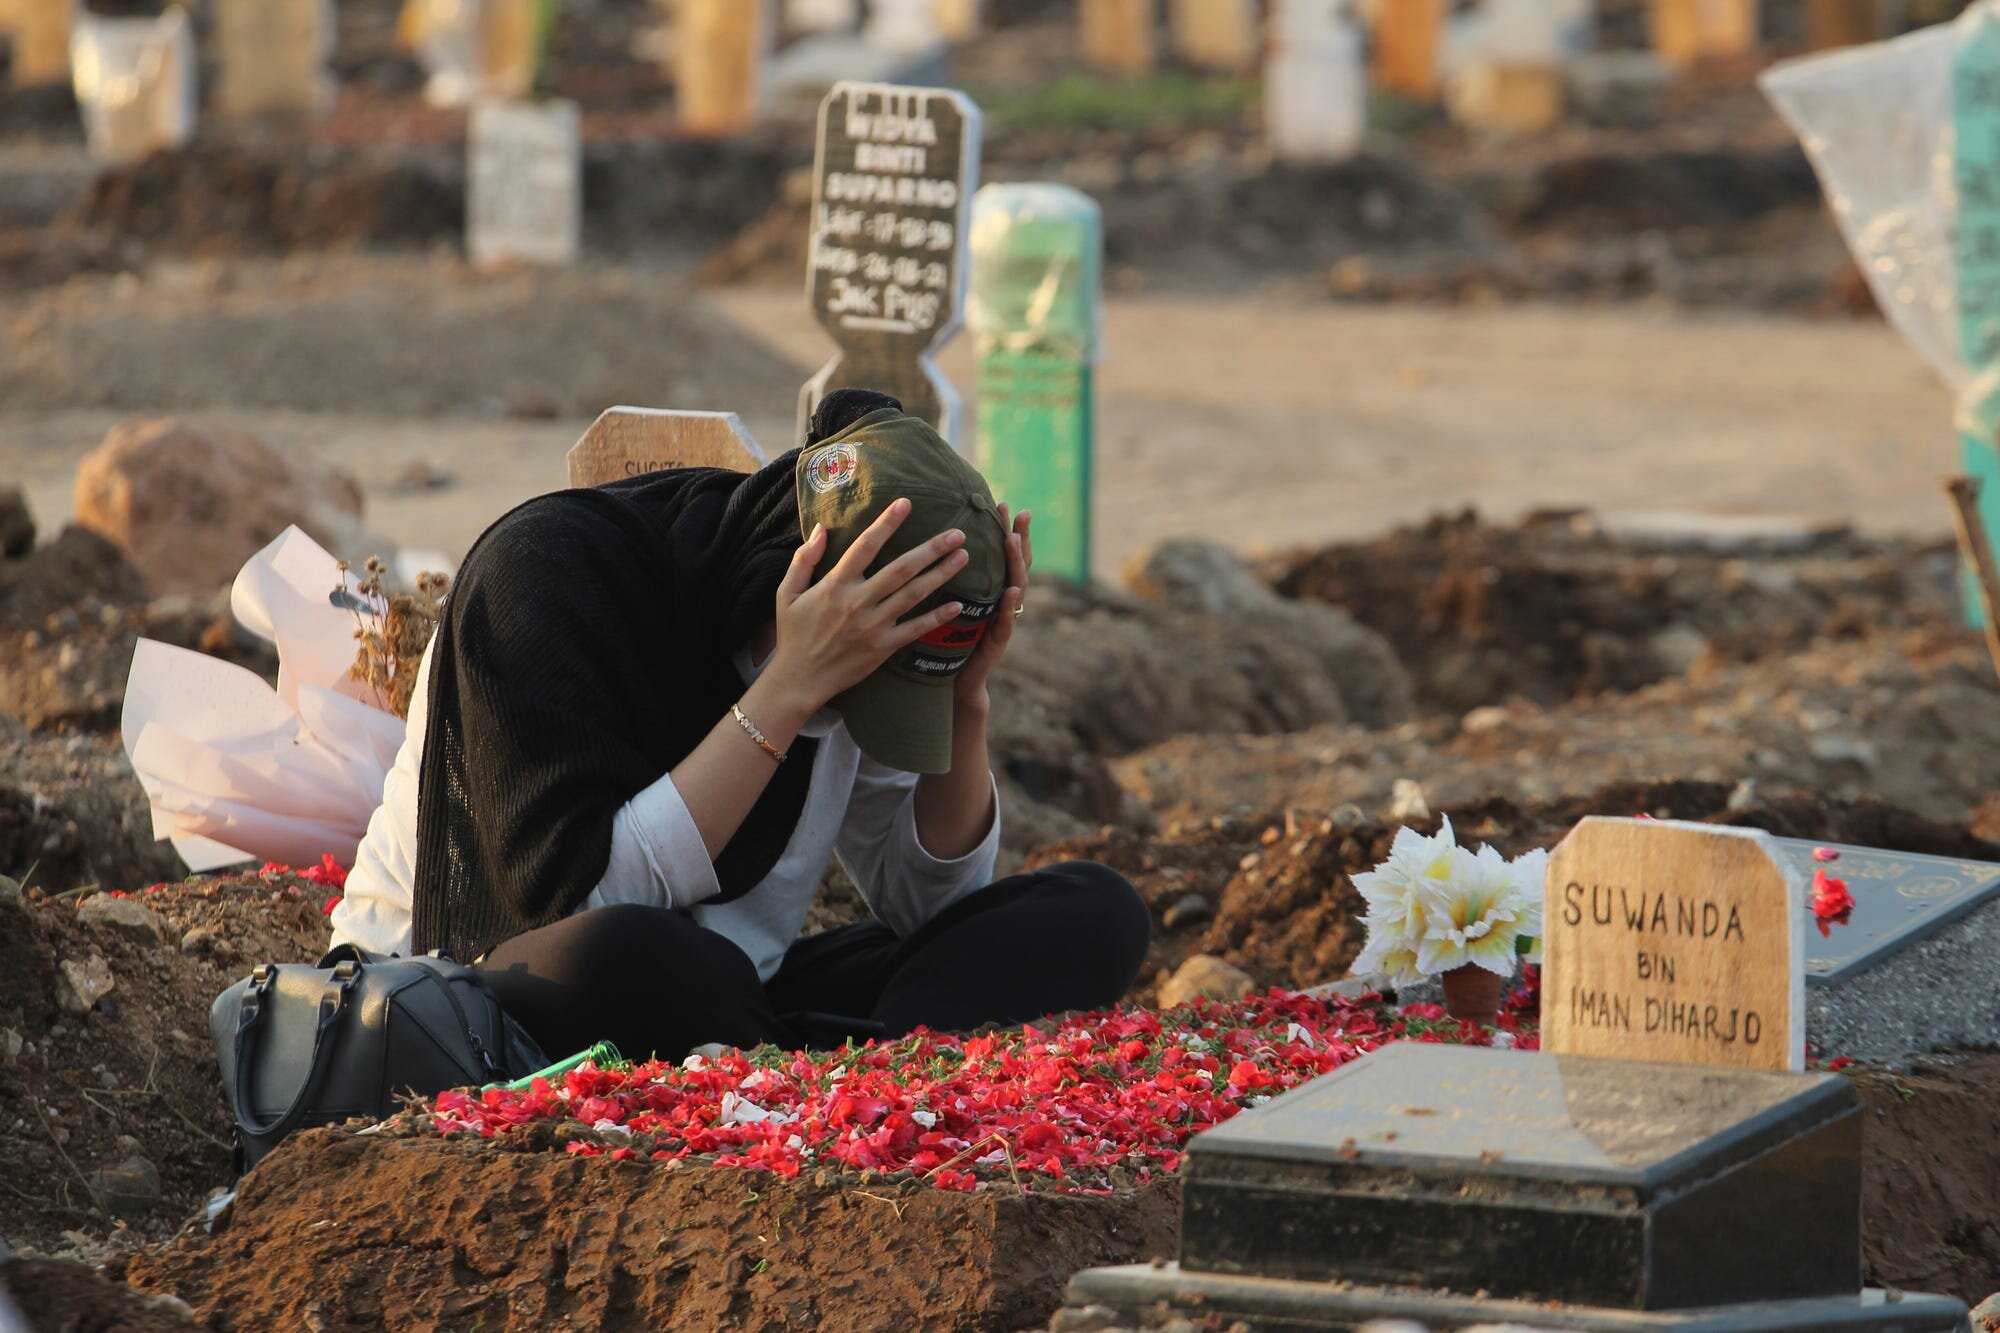 Grieving - At least 140, 000 people have died from COVID in Indonesia.